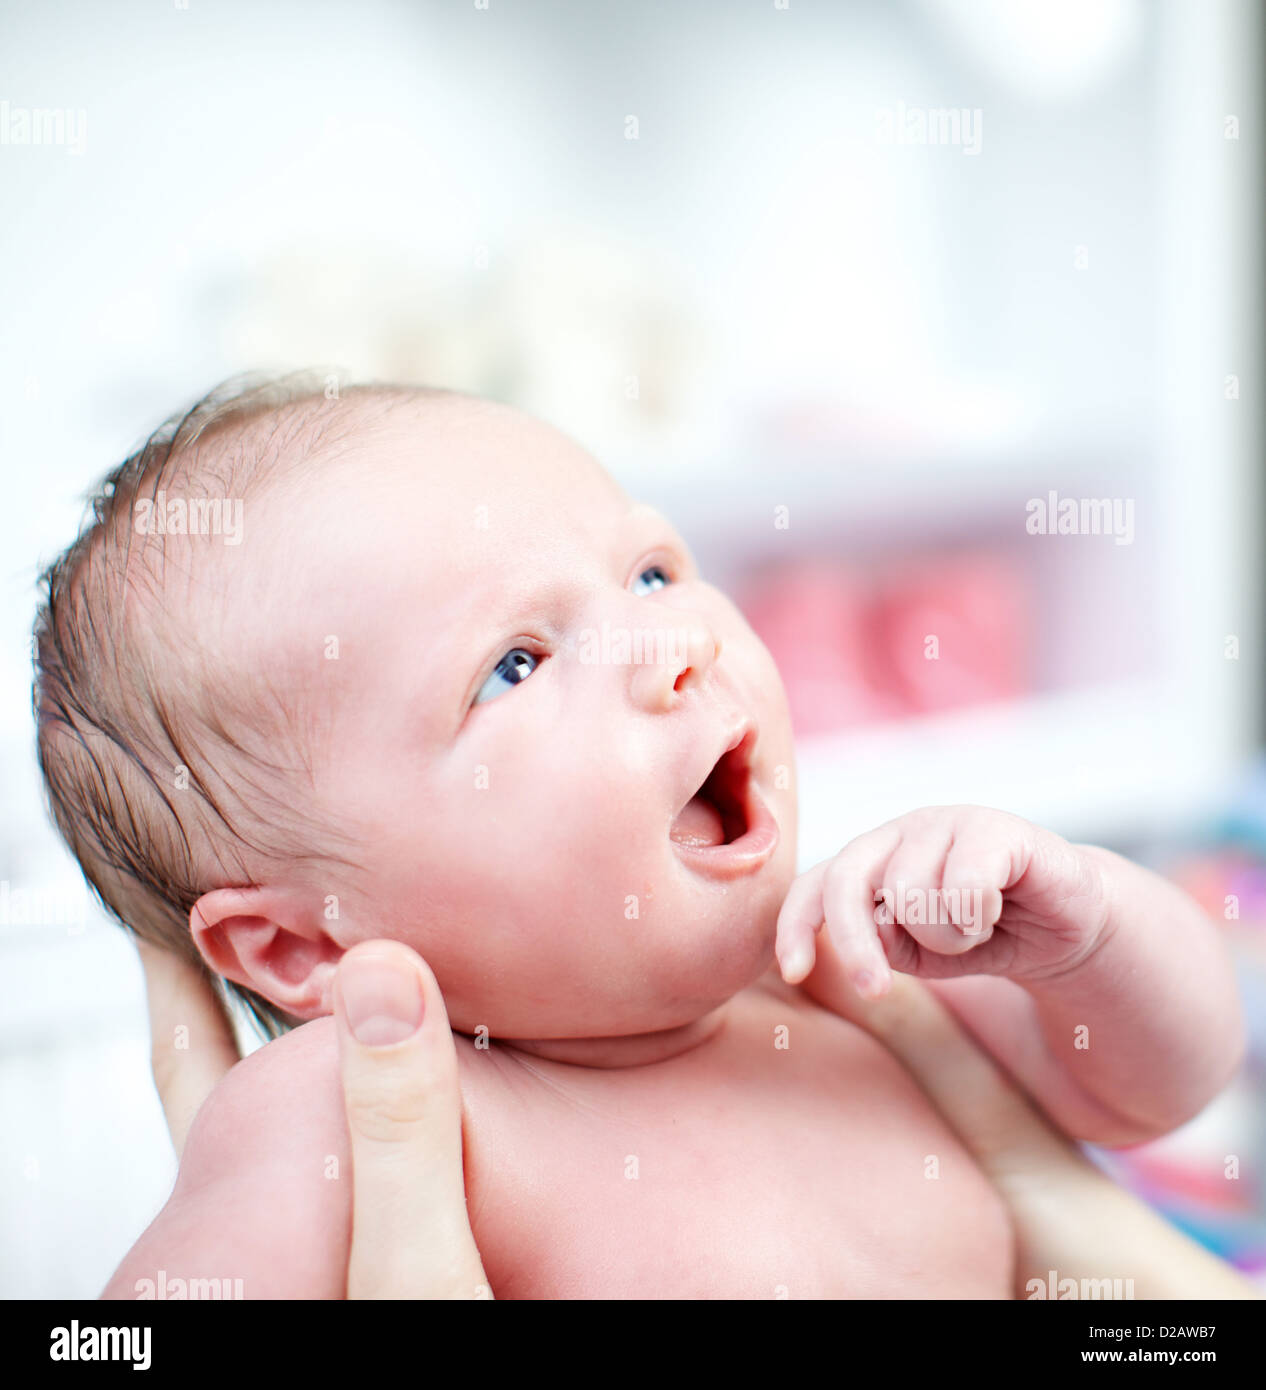 Adorable beautiful newborn baby cradled in its mothers hands looking up with a look of wonderment Stock Photo